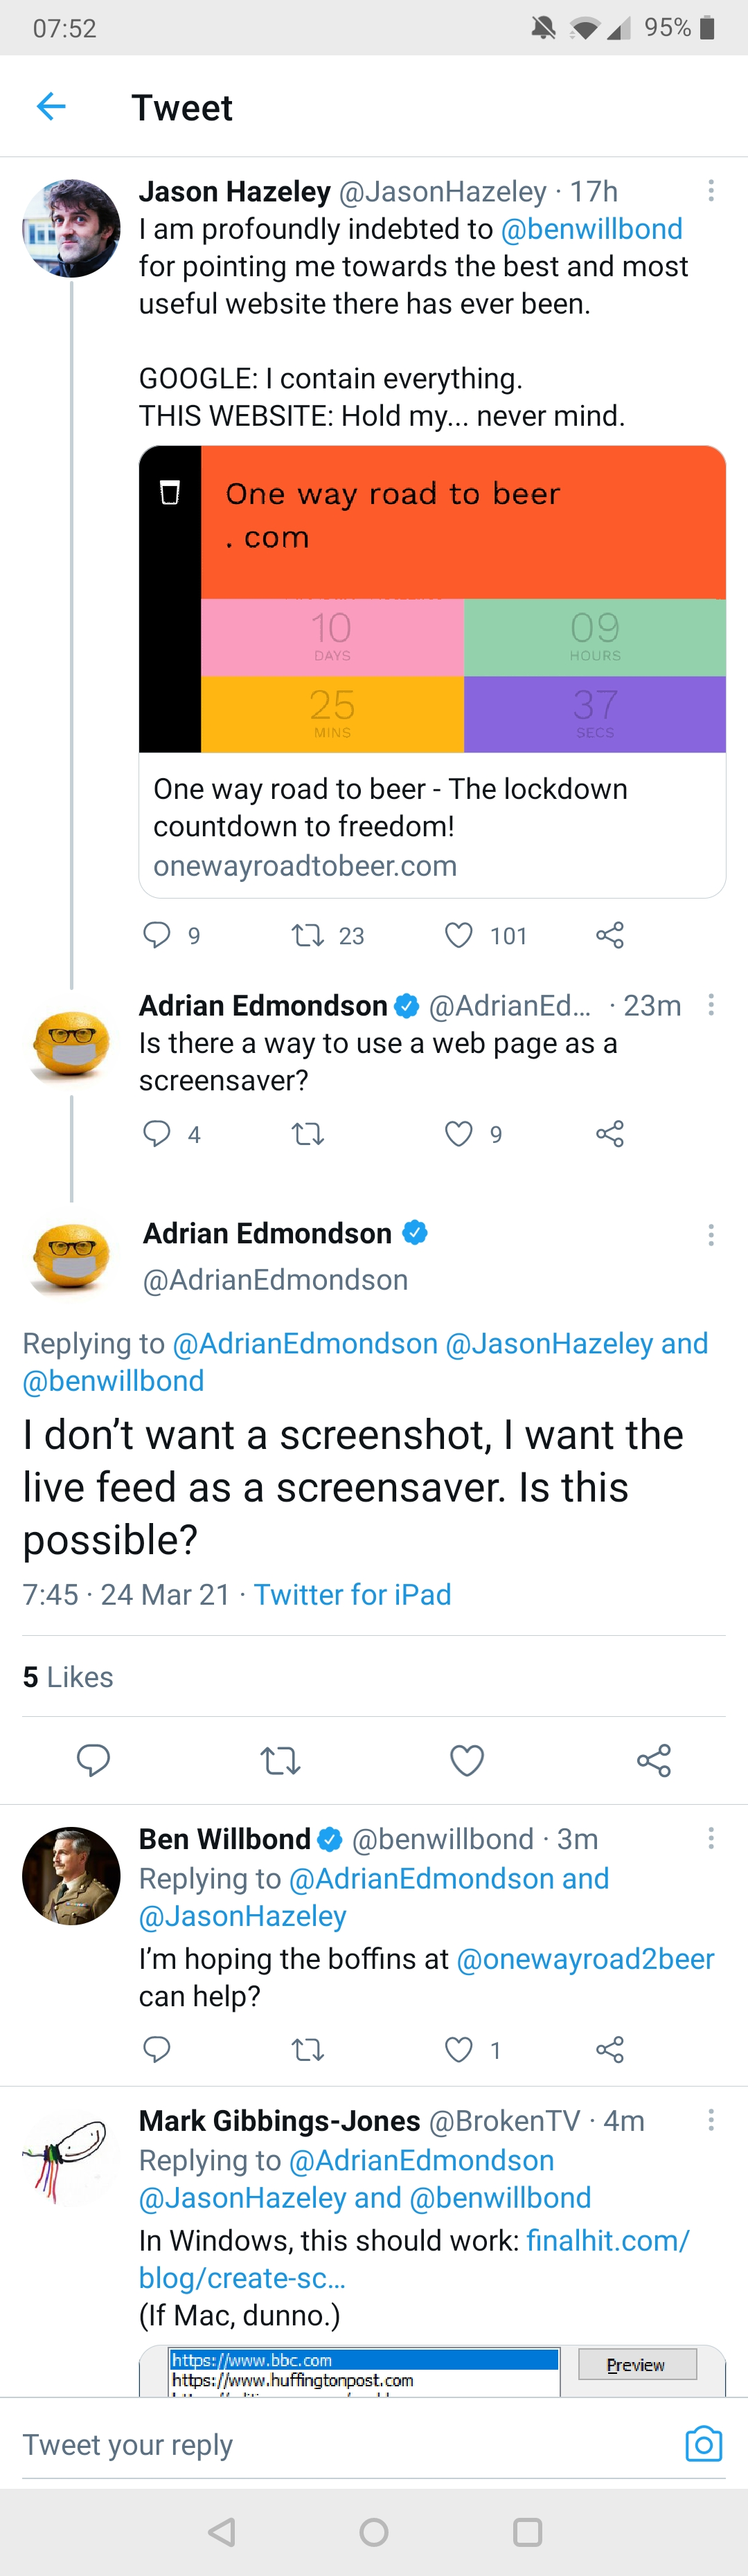 A screenshot of a tweet where Adrian Edmondson was asking how he can turn the site into a screensaver